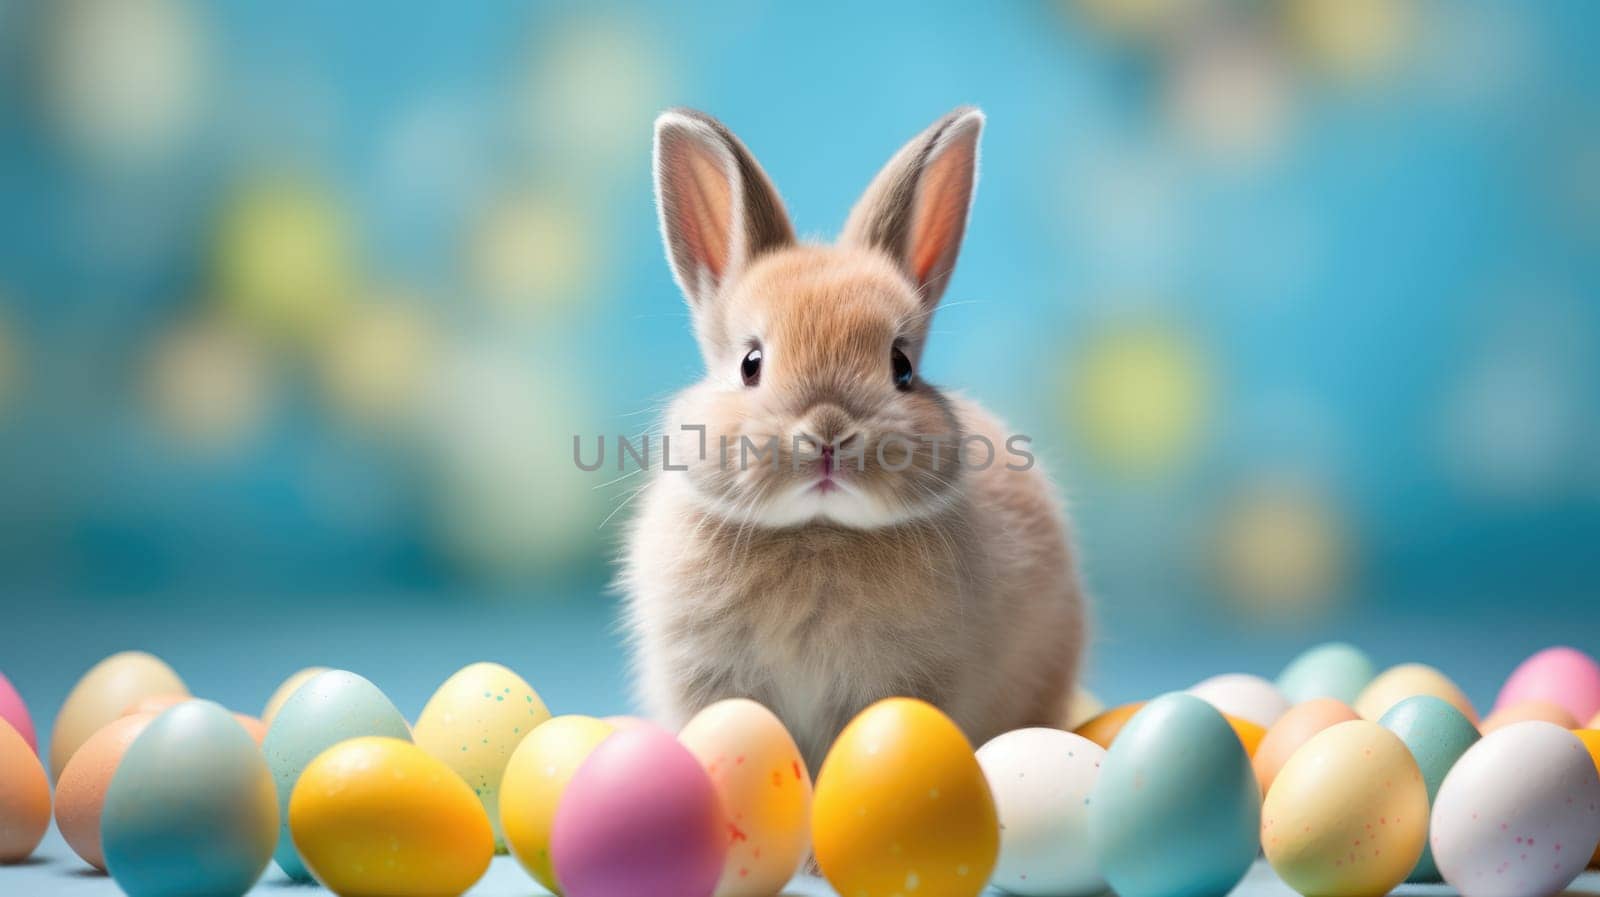 Cute rabbit with colorful Easter eggs on blue background by JuliaDorian